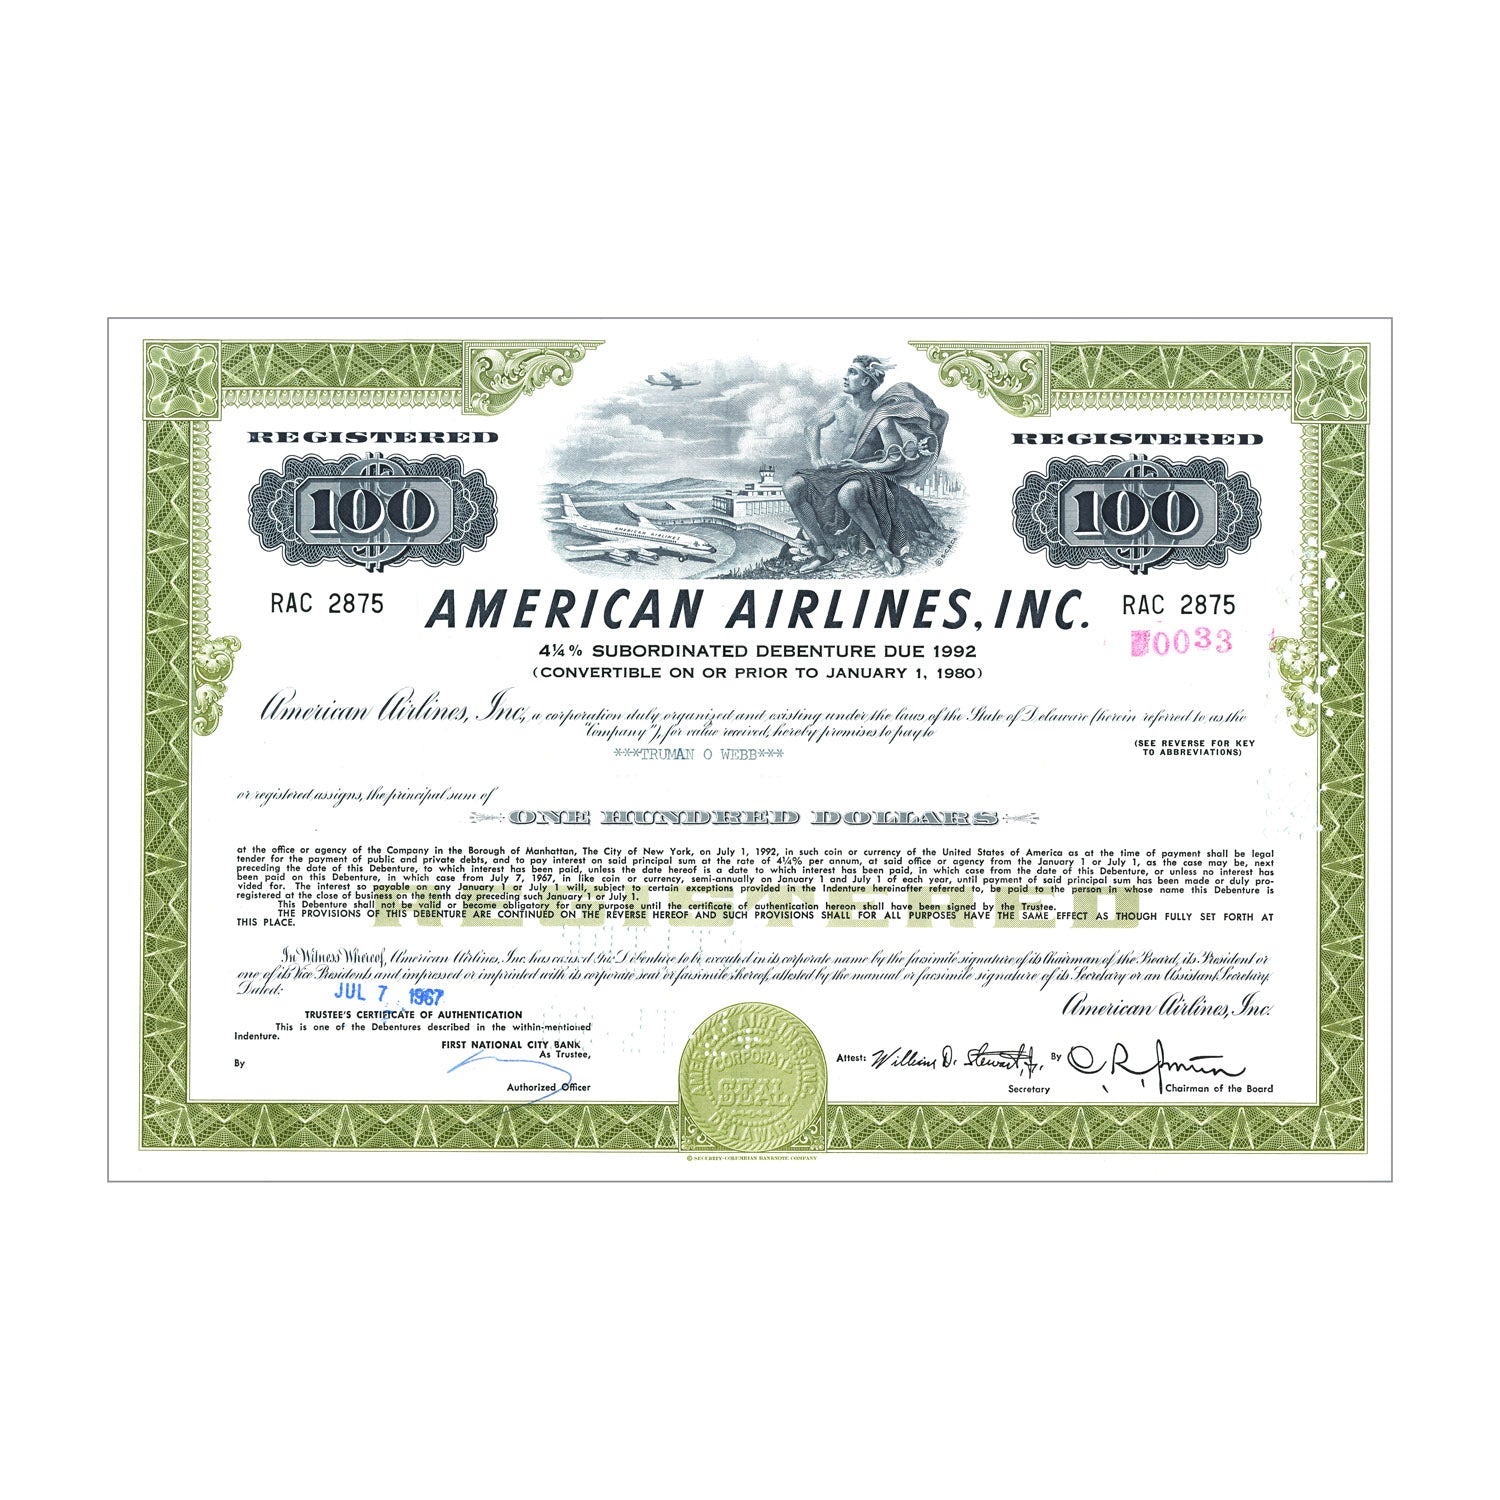 American Airlines Inc. Bond Certificate // $100 // Green // 1960s-70s